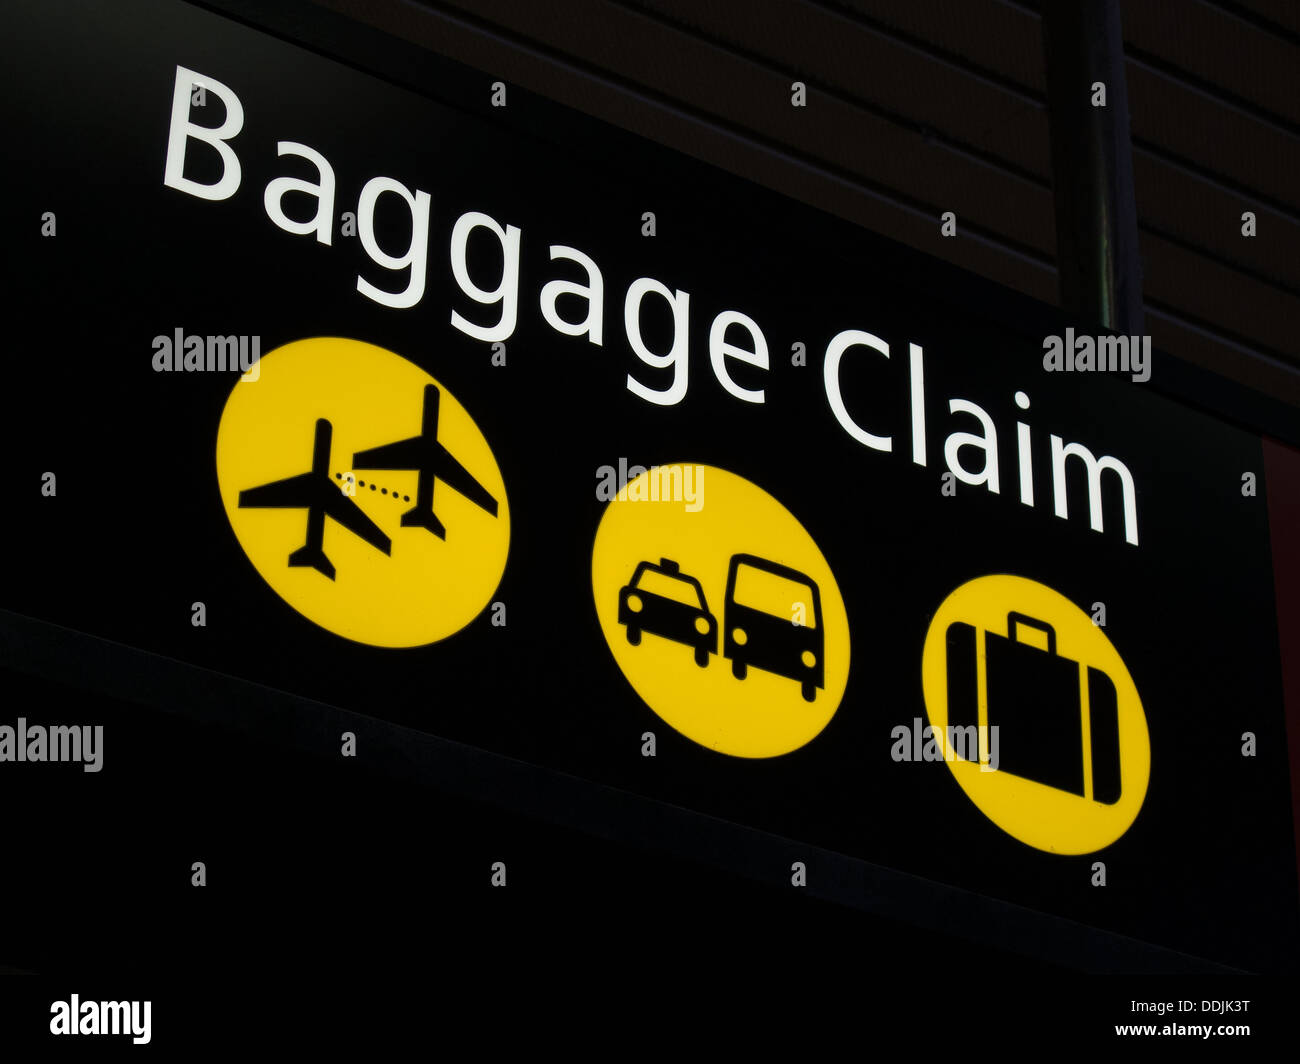 Airport baggage sign directing passengers to various areas of the airport Stock Photo